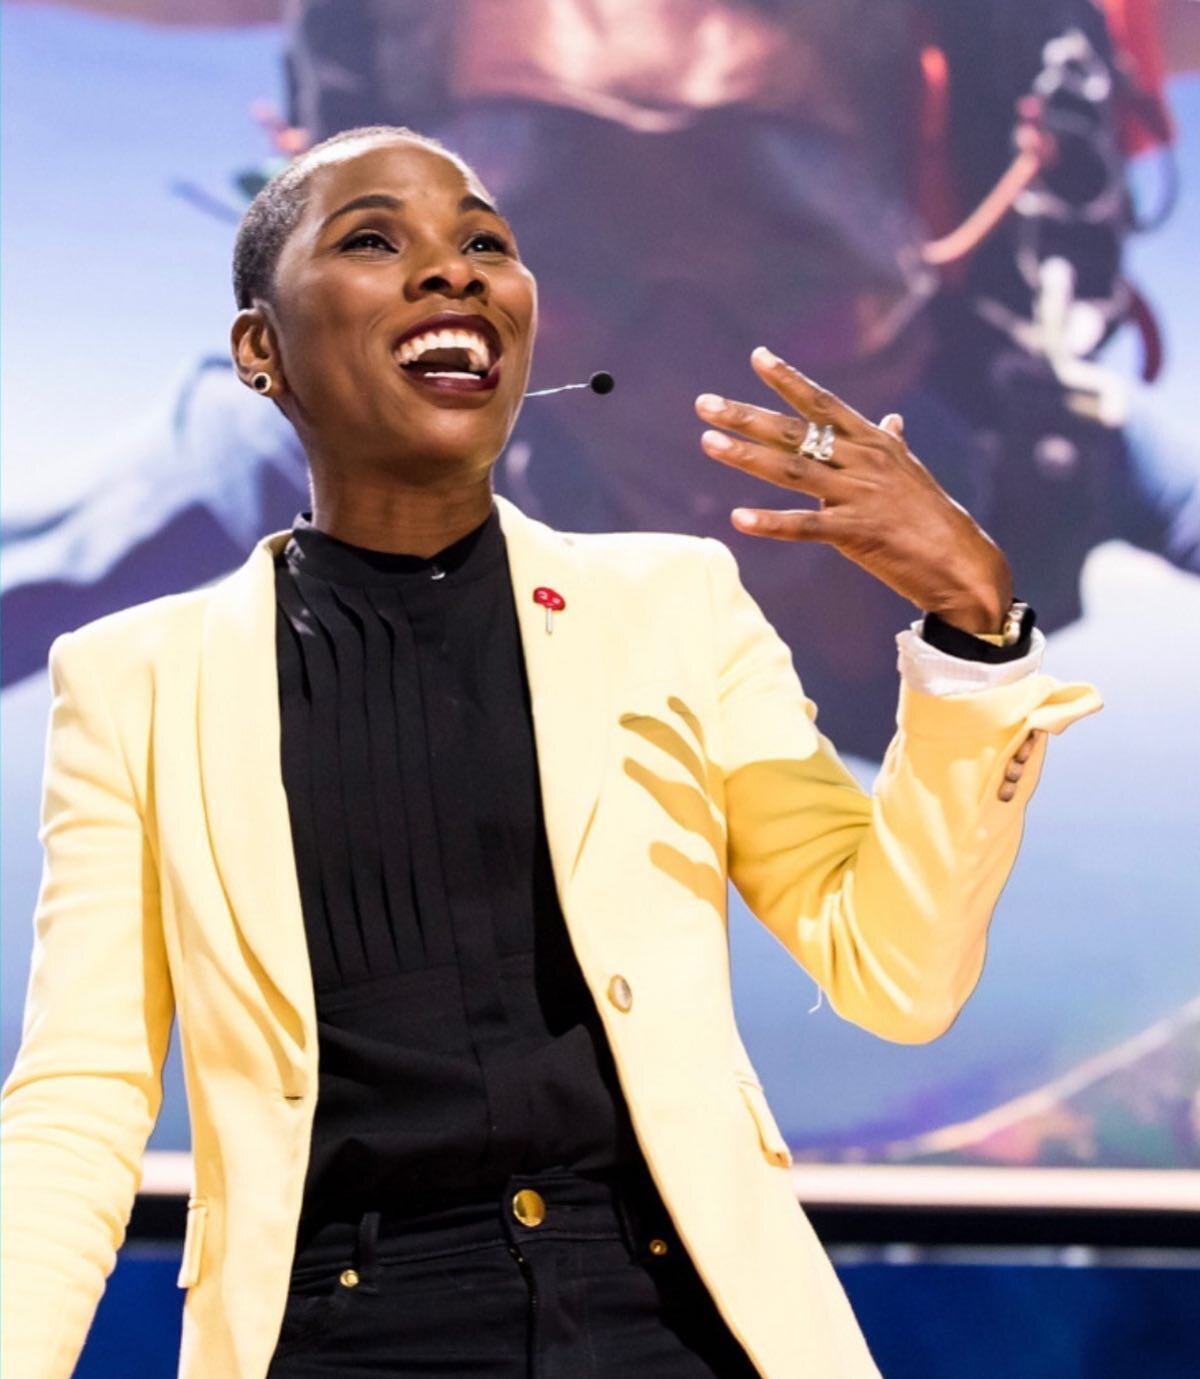 @luvvie, goddess of cheekbones, truth and jollof is in the house and she&rsquo;s here to talk about her newest book, PROFESSIONAL TROUBLE MAKER: THE FEAR-FIGHTER MANUAL. We discuss what it means to fail loudly, speaking truth, being human, the fear o